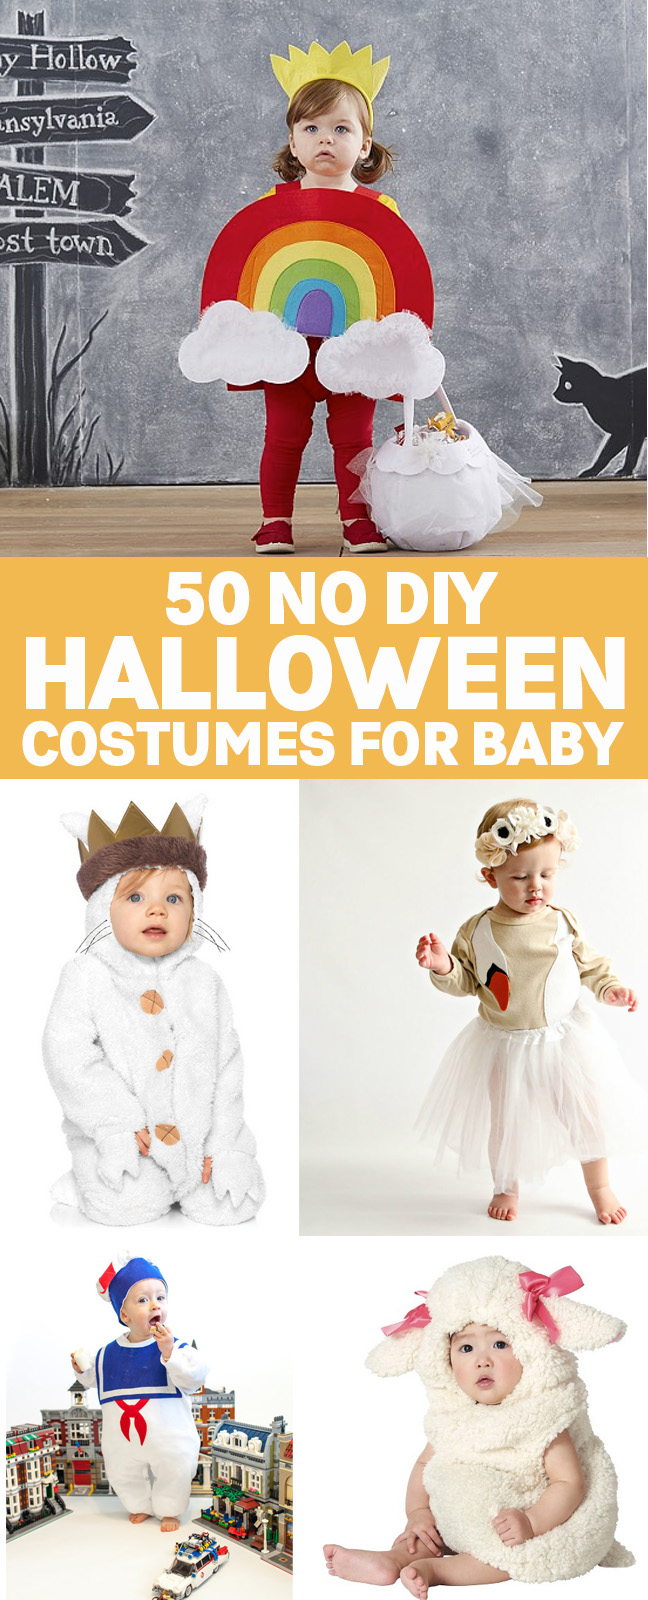 pinterest-50-no-diy-halloween-costumes-for-baby-that-you-can-buy-daily-little